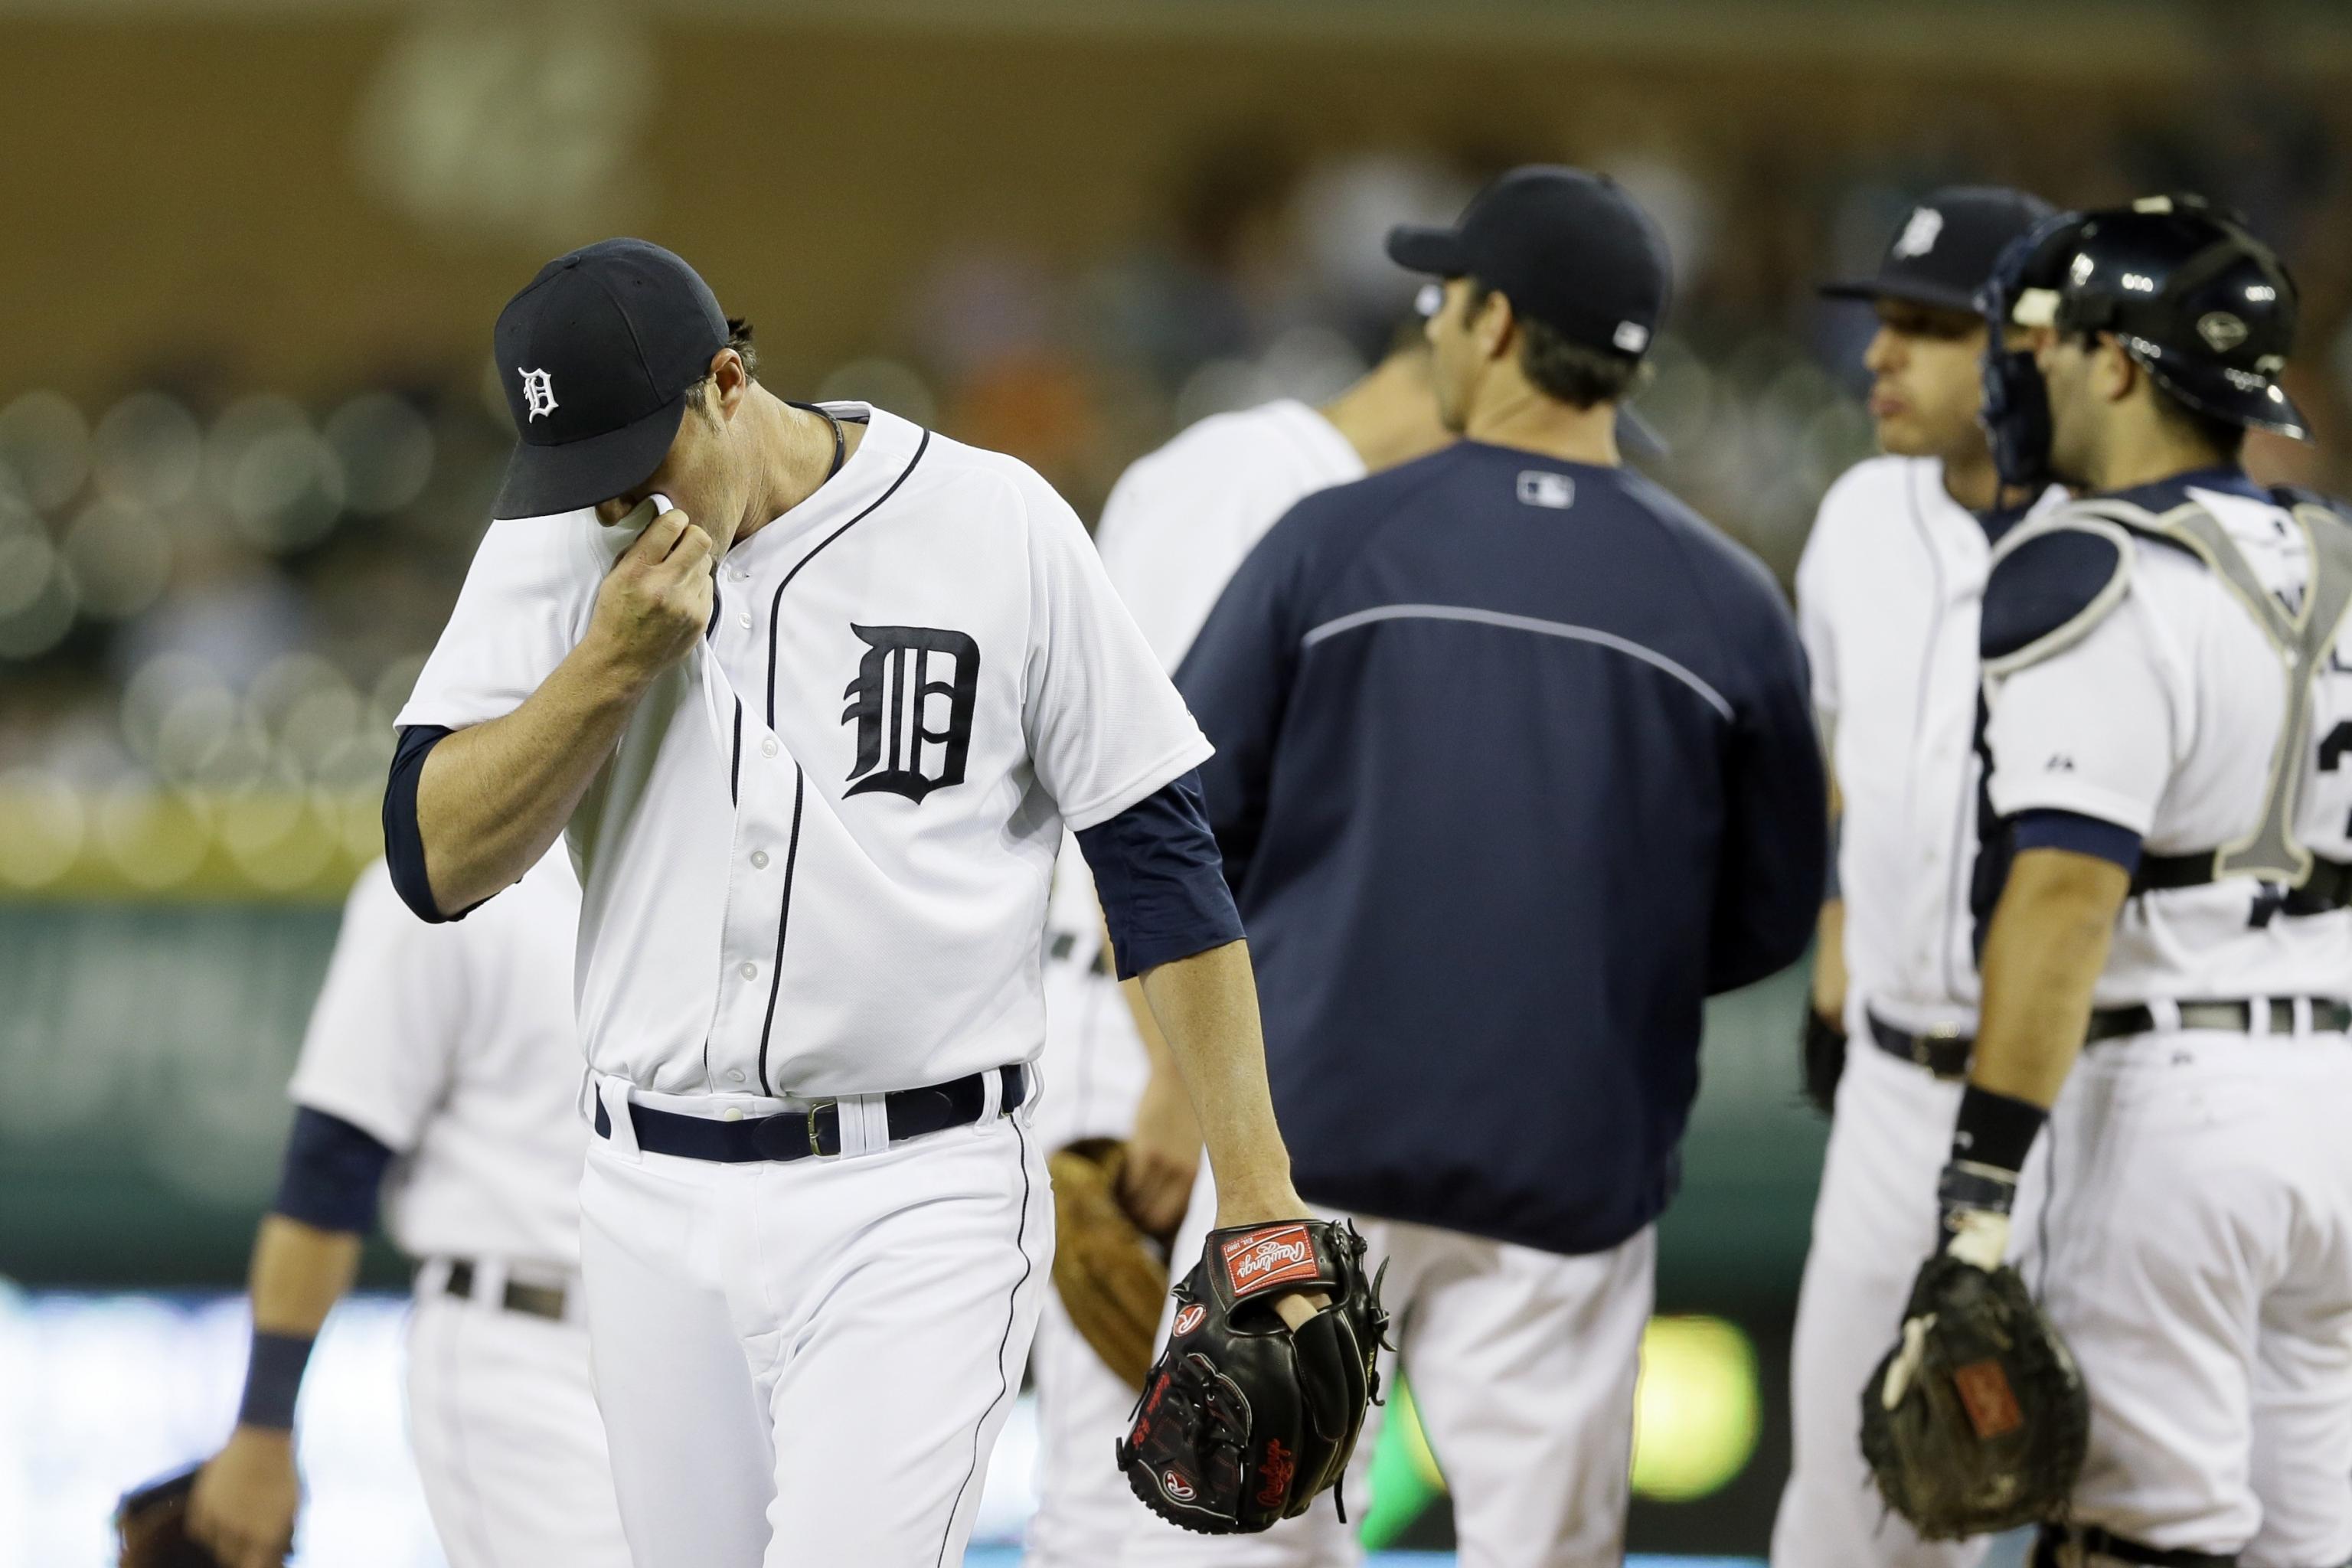 Joba Chamberlain a smart signing for Dave Dombrowski, Tigers - Bless You  Boys